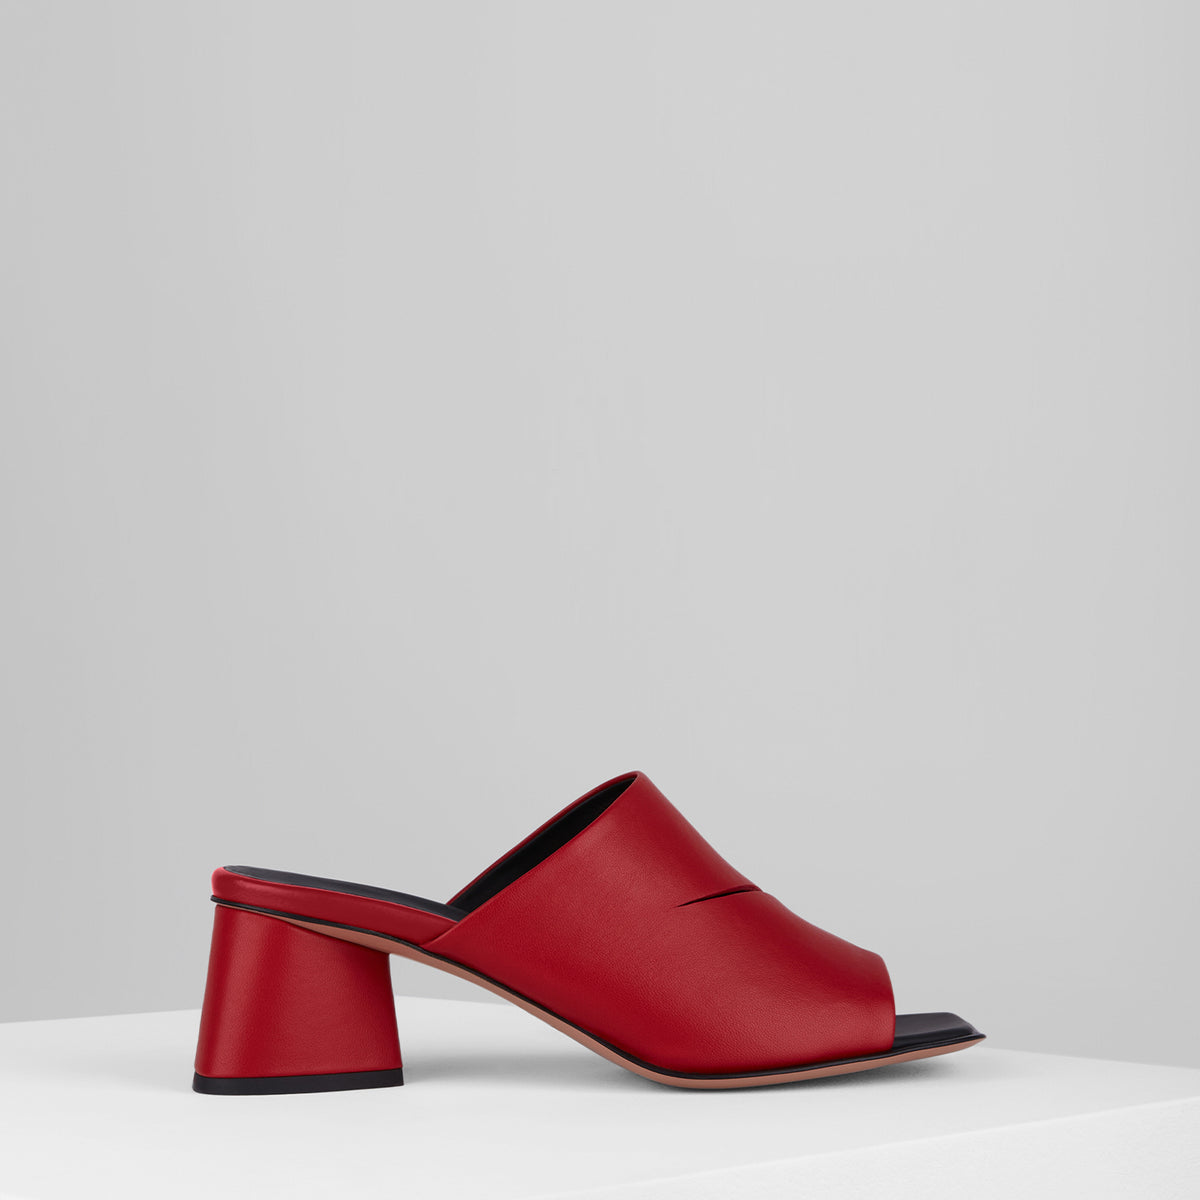 Load image into Gallery viewer, Spacco Sandals in Rosso